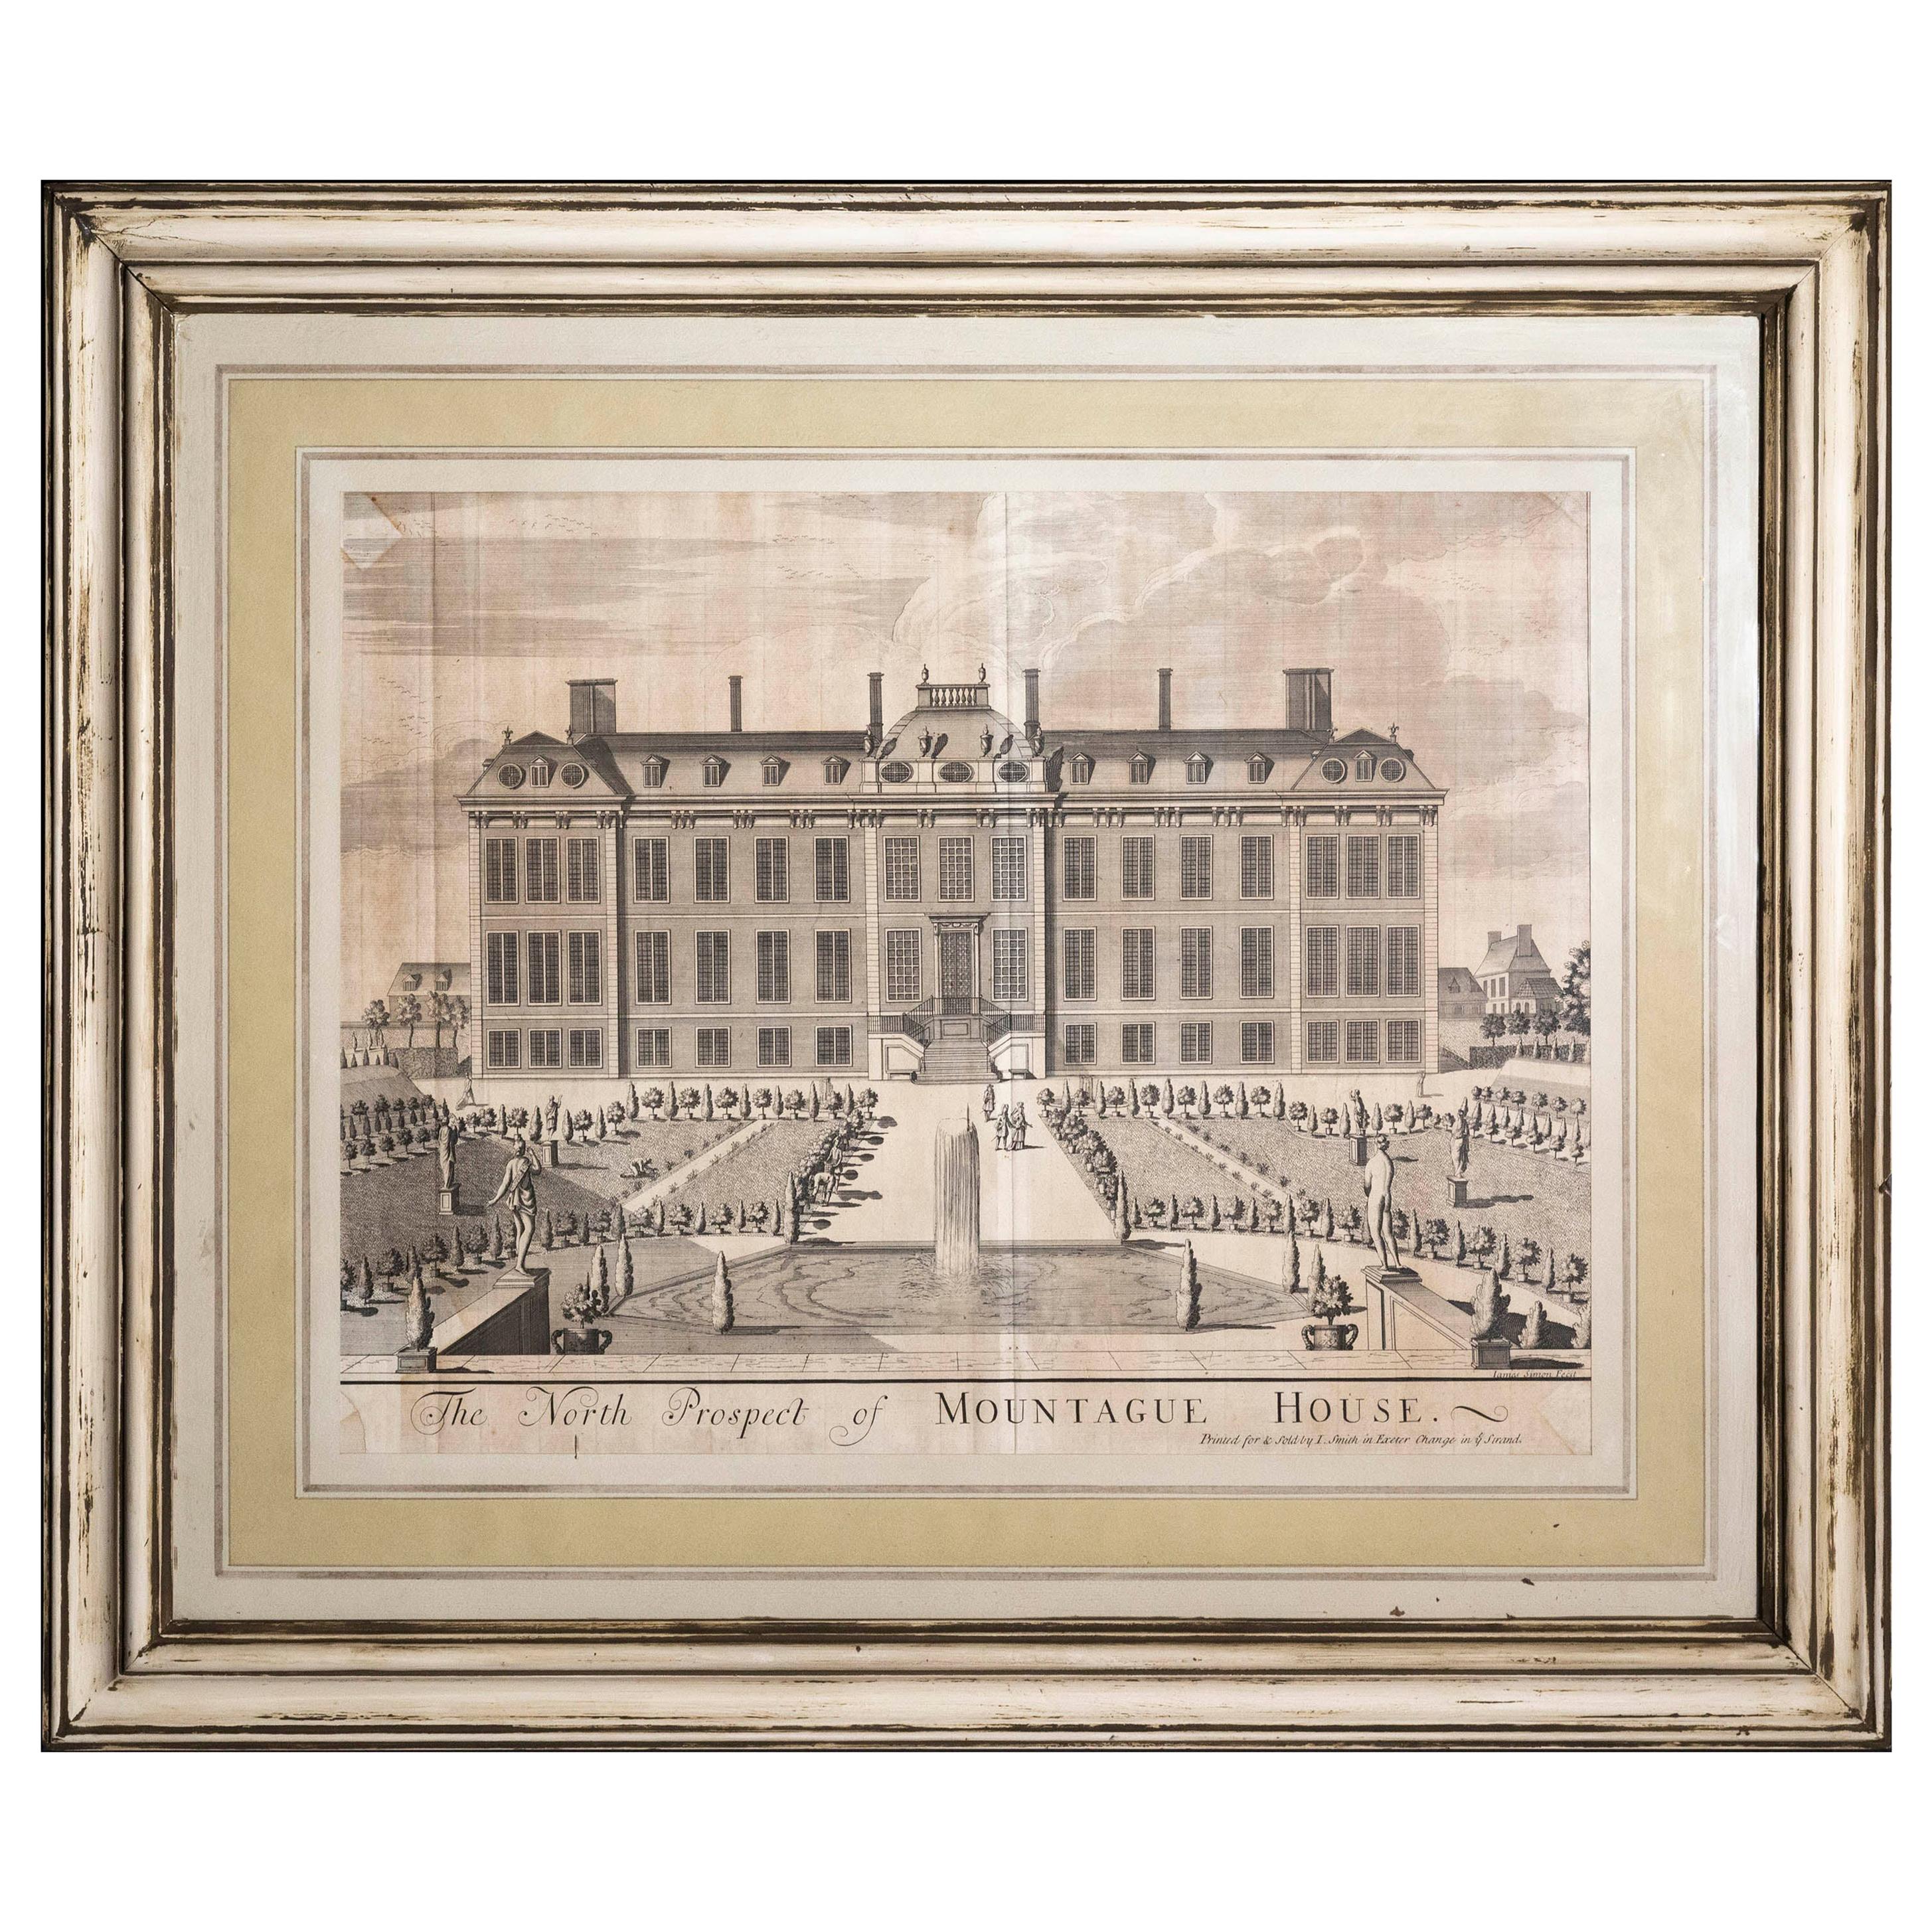 Large Antique Architectural Prints or Engraving of Montagu House, circa 1715